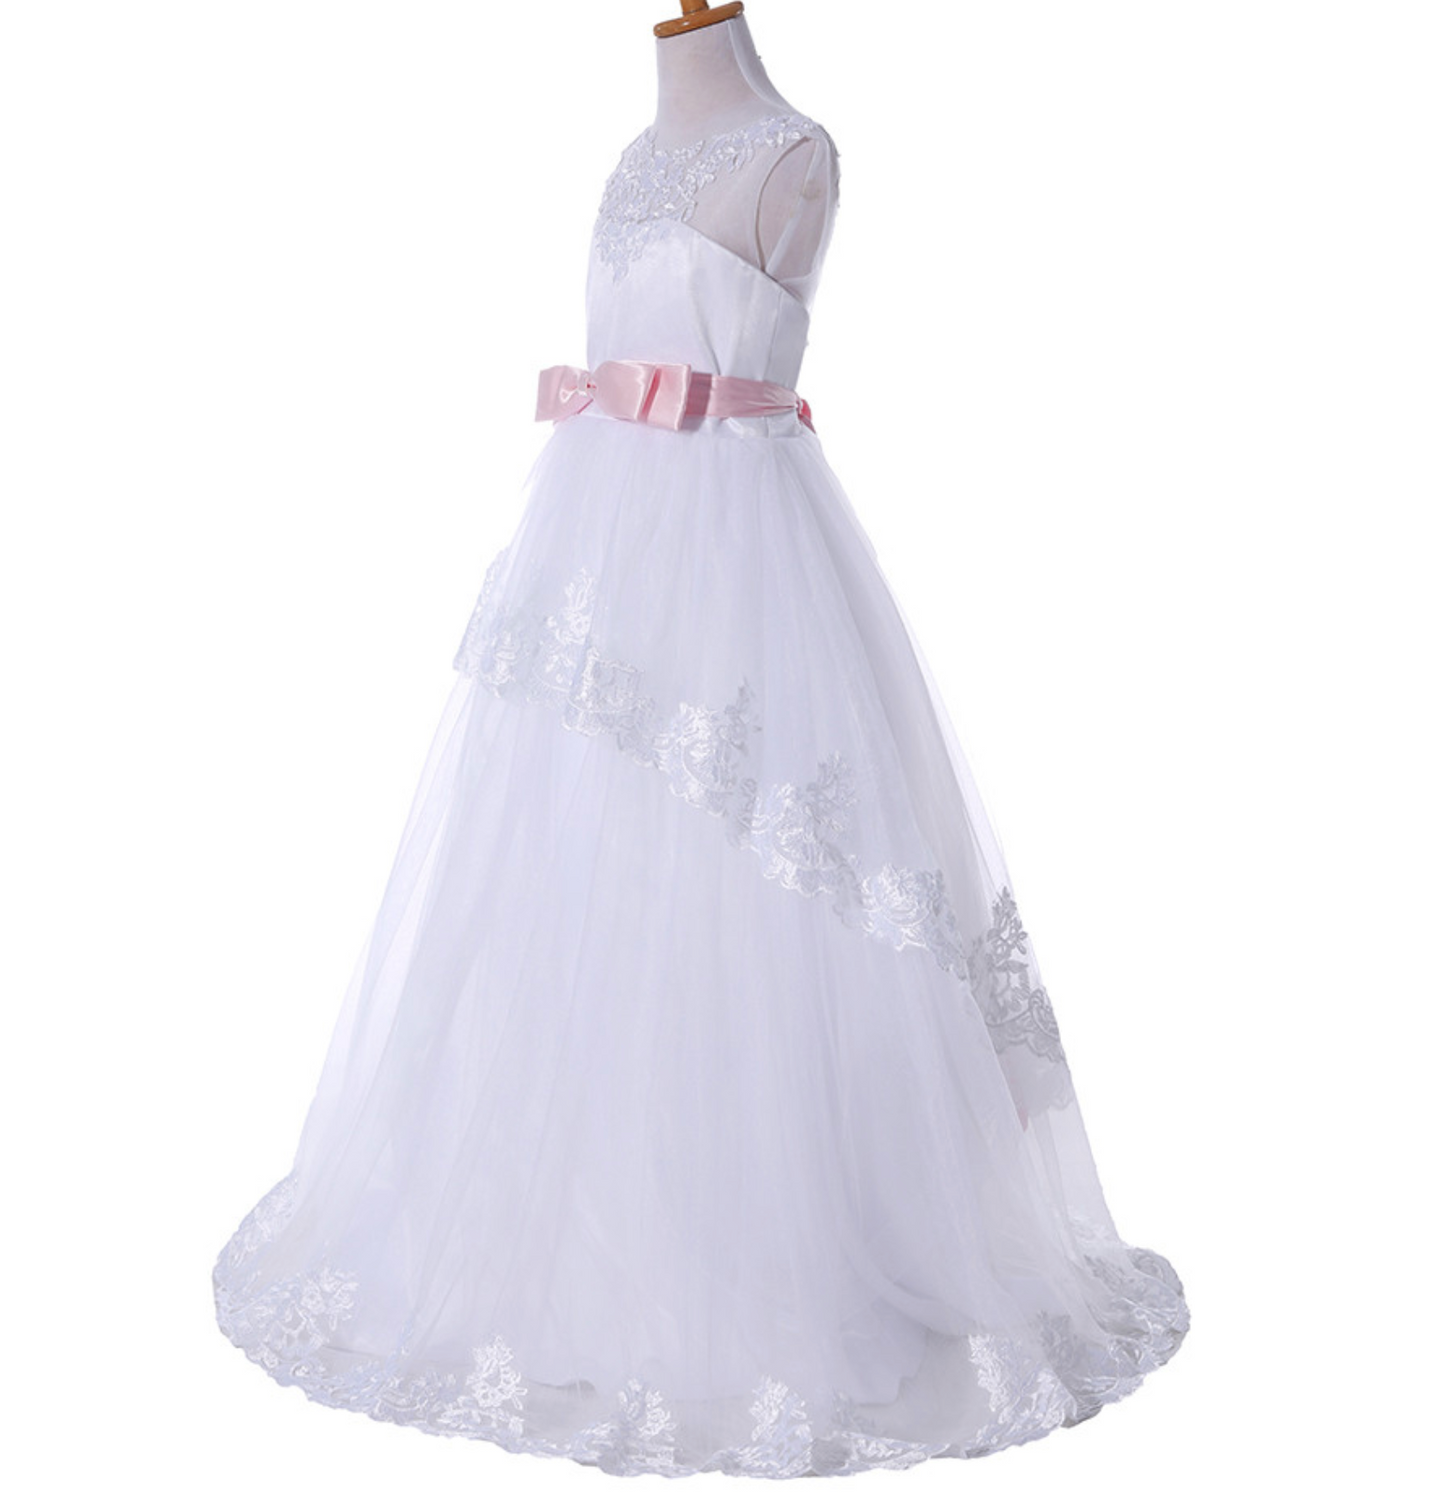 Princess Flower Girl Dress Wedding Birthday Party Dresses For Girls - TulleLux Bridal Crowns &  Accessories 